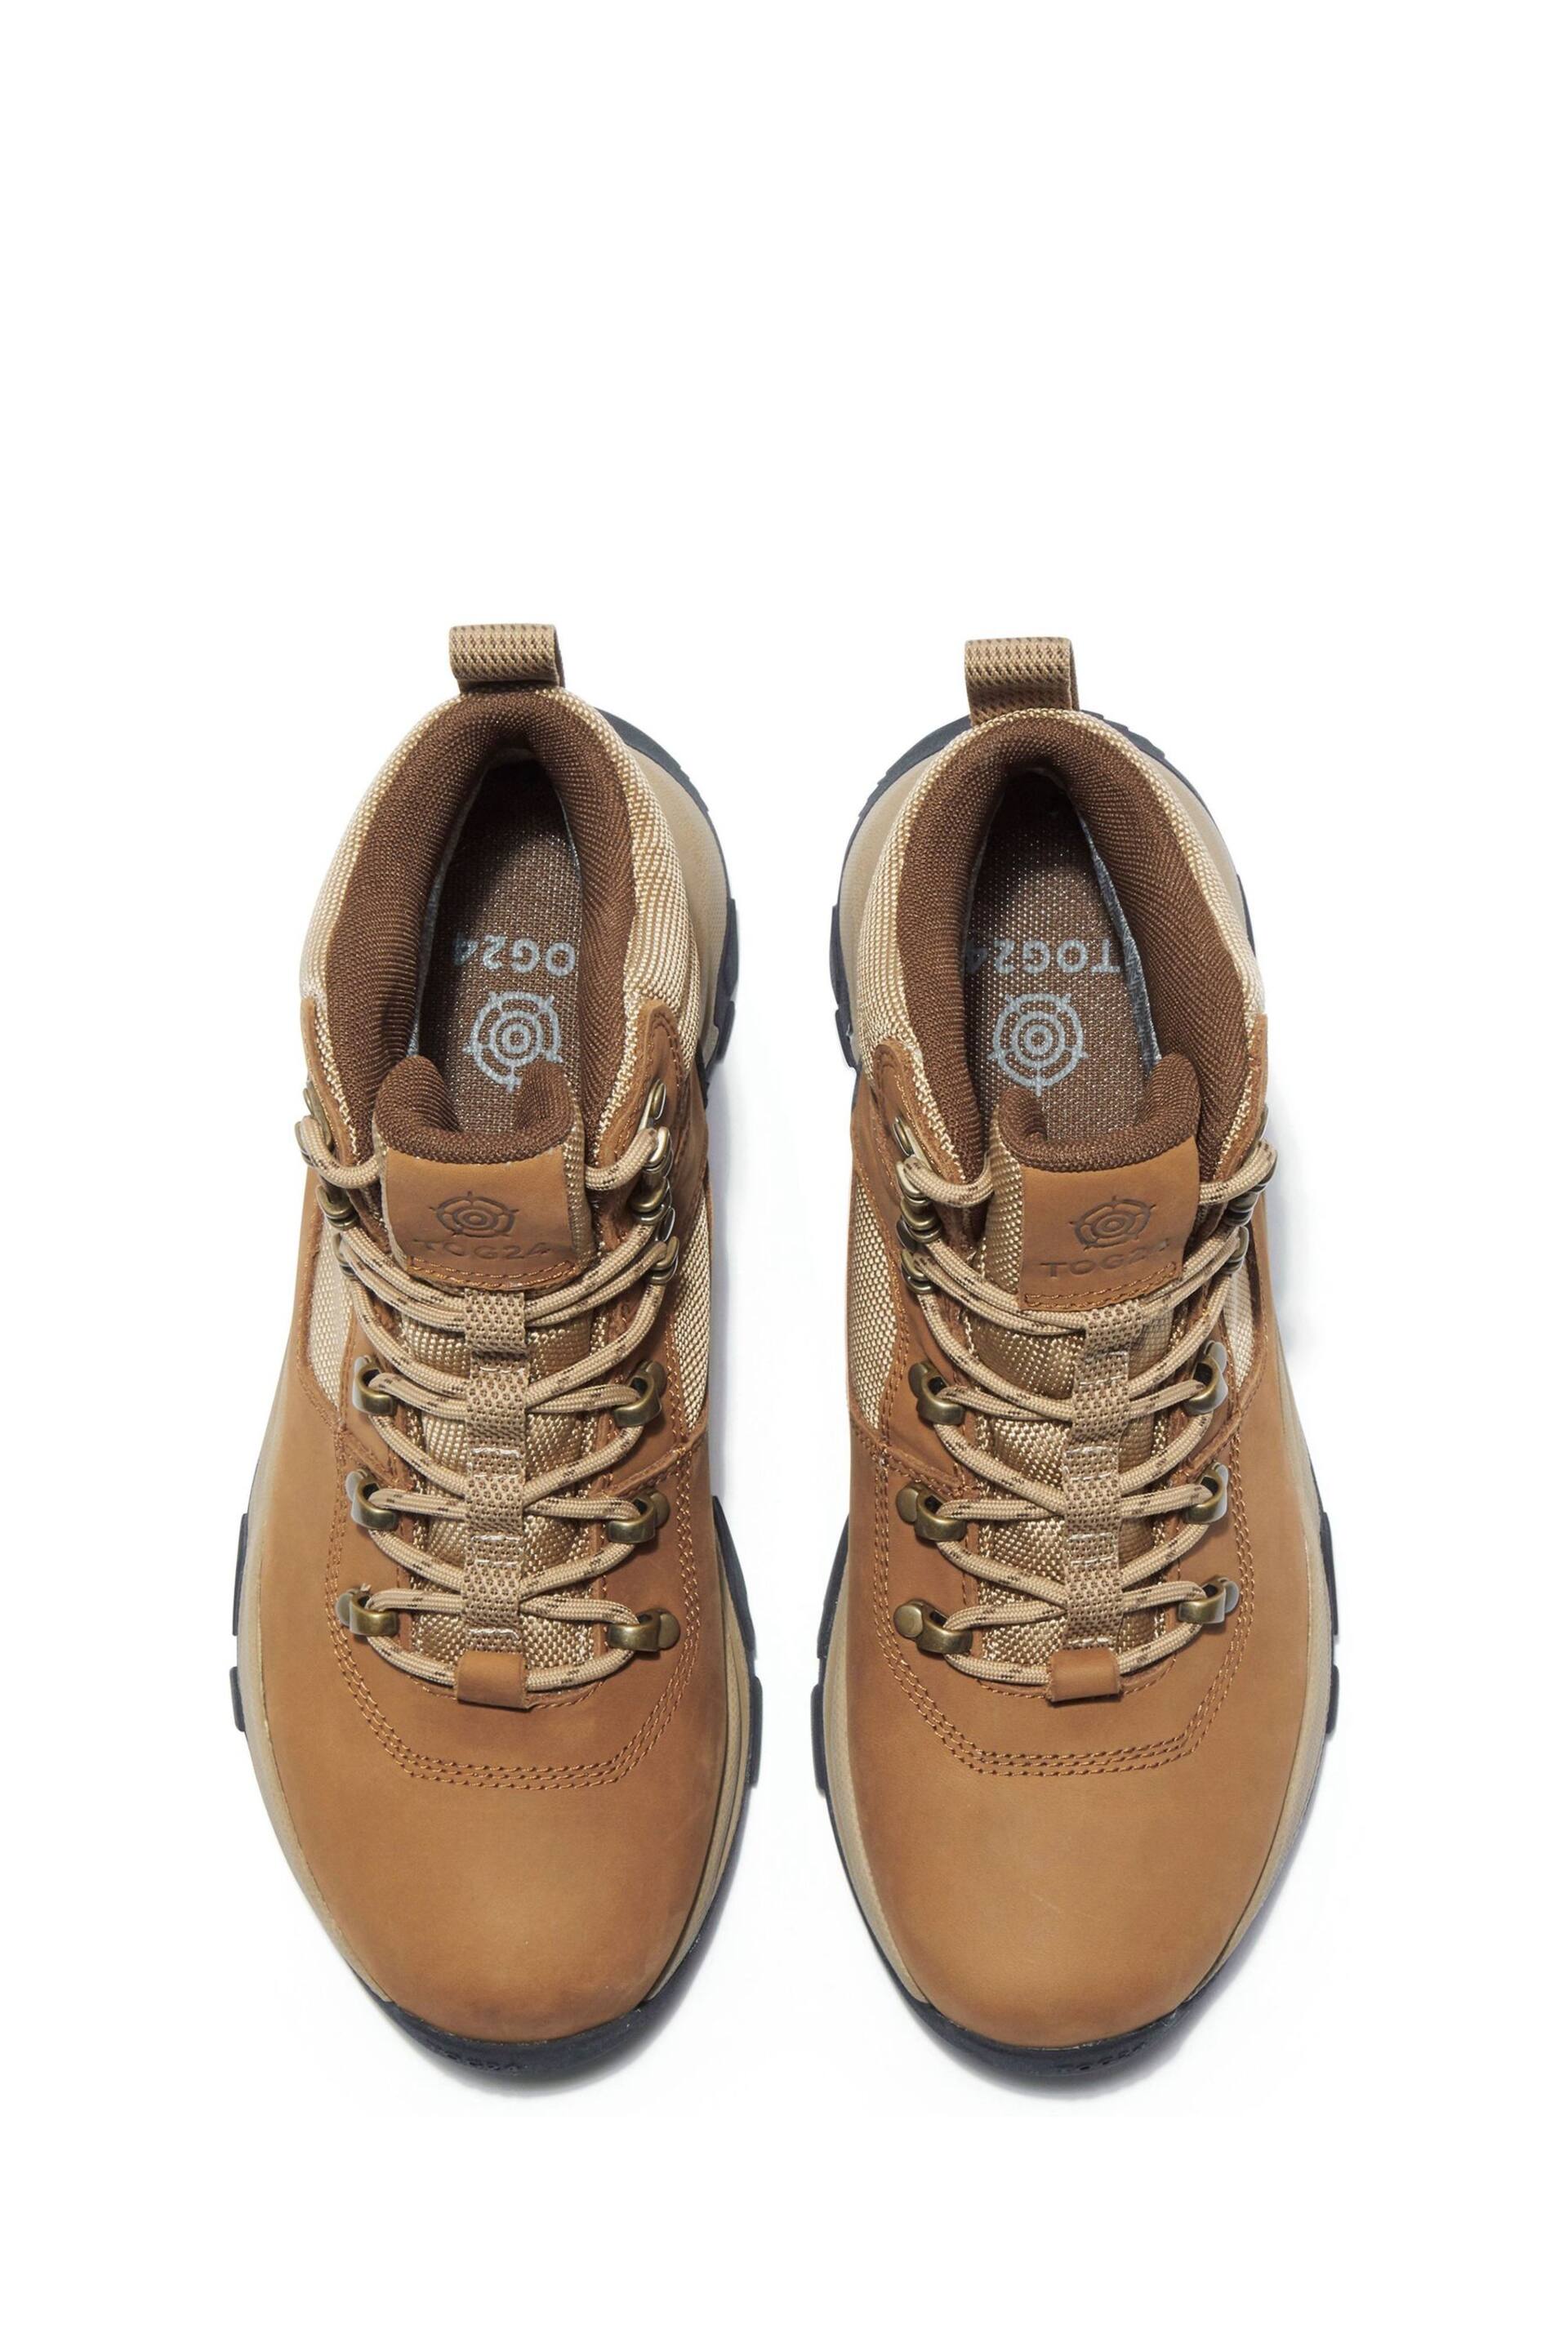 Tog 24 Brown Tundra Walking Boots - Image 5 of 7